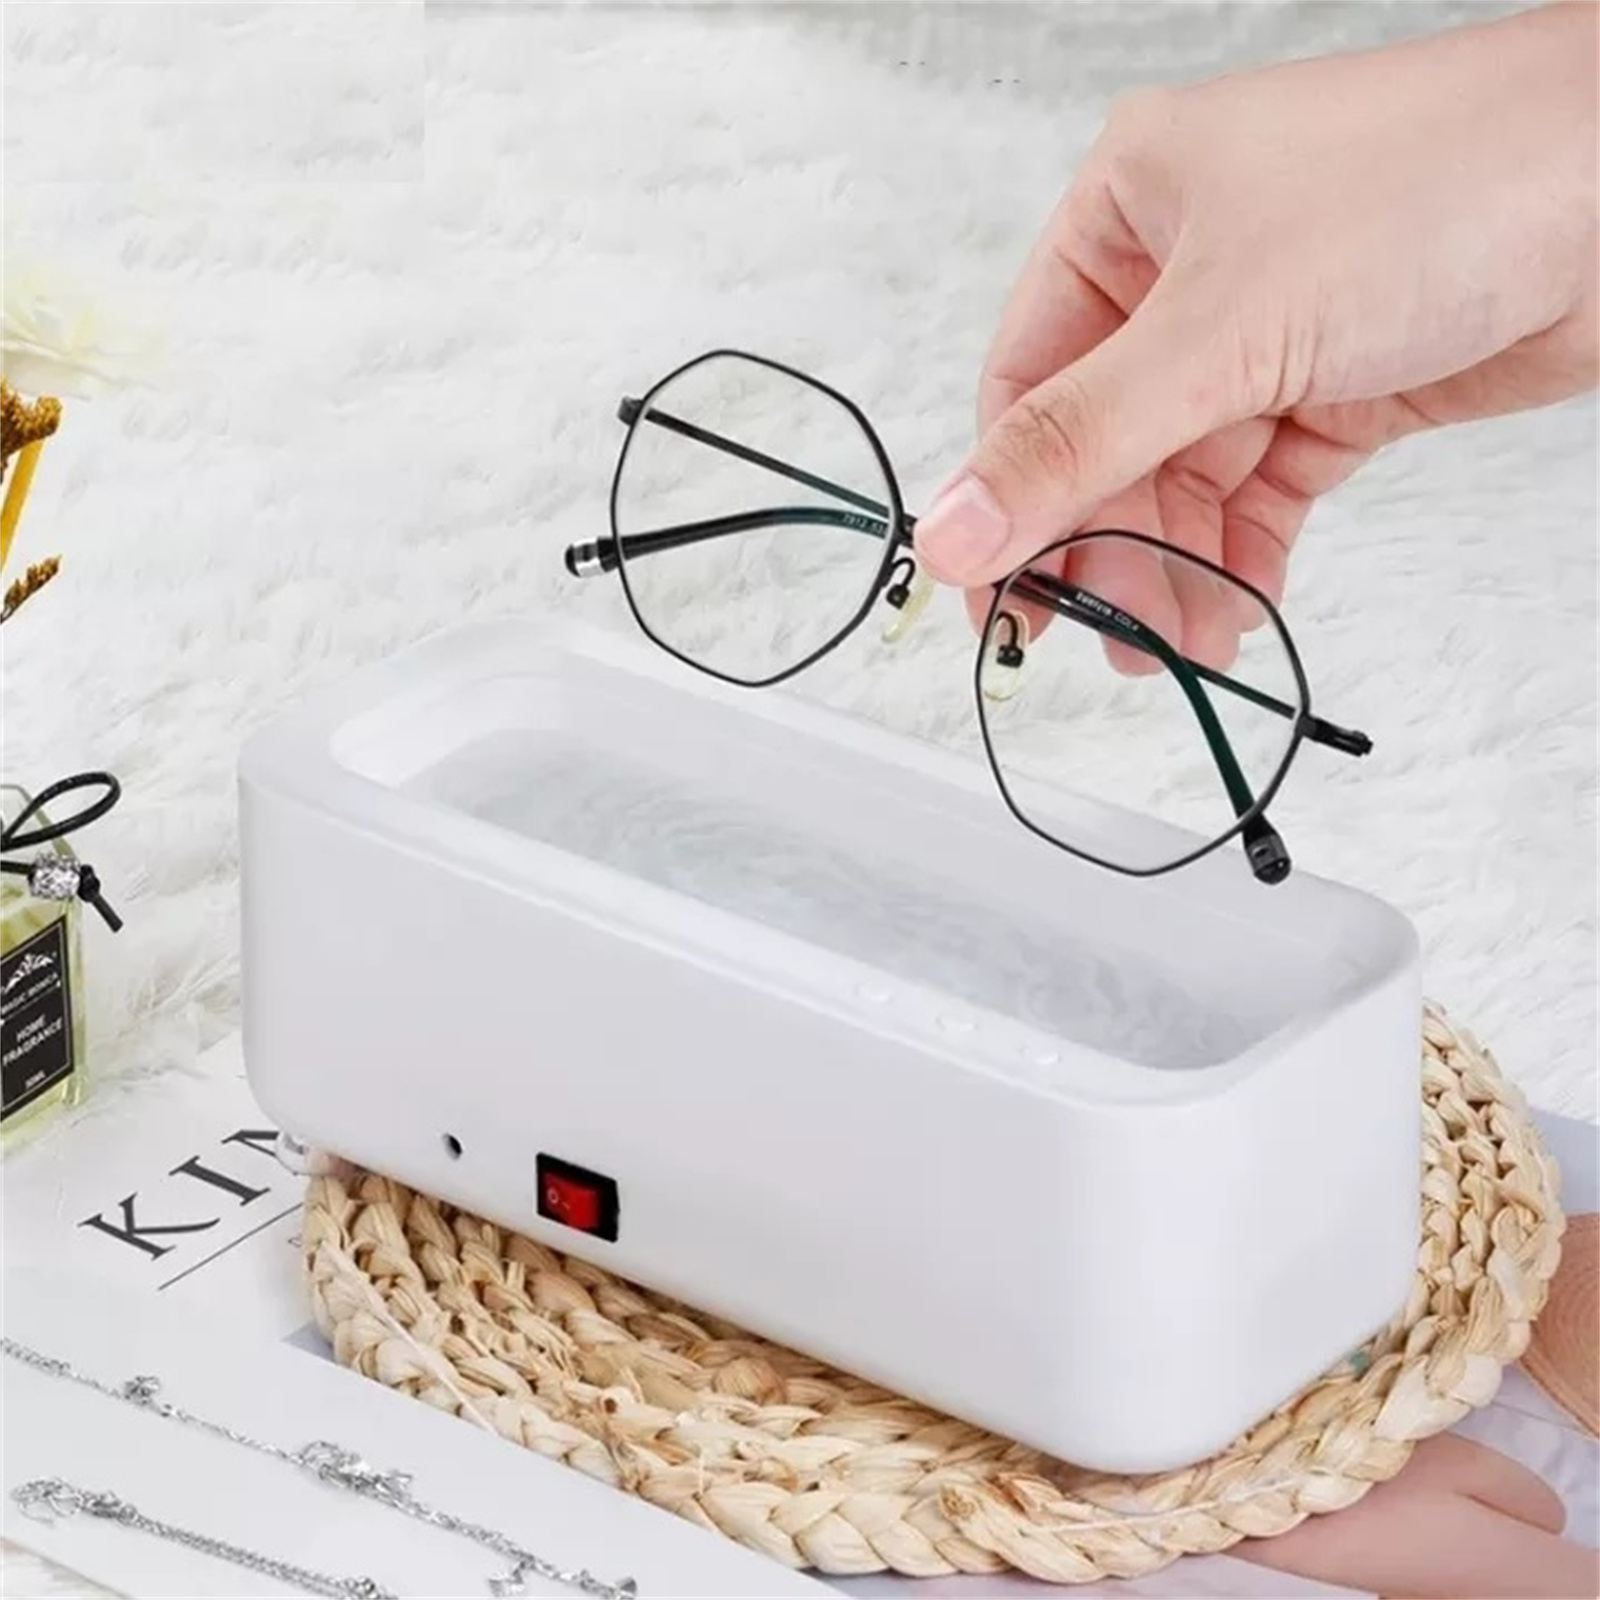 Ultrasonic Cleaning Machine Usb Rechargeable 45000hz High Frequency Vibration